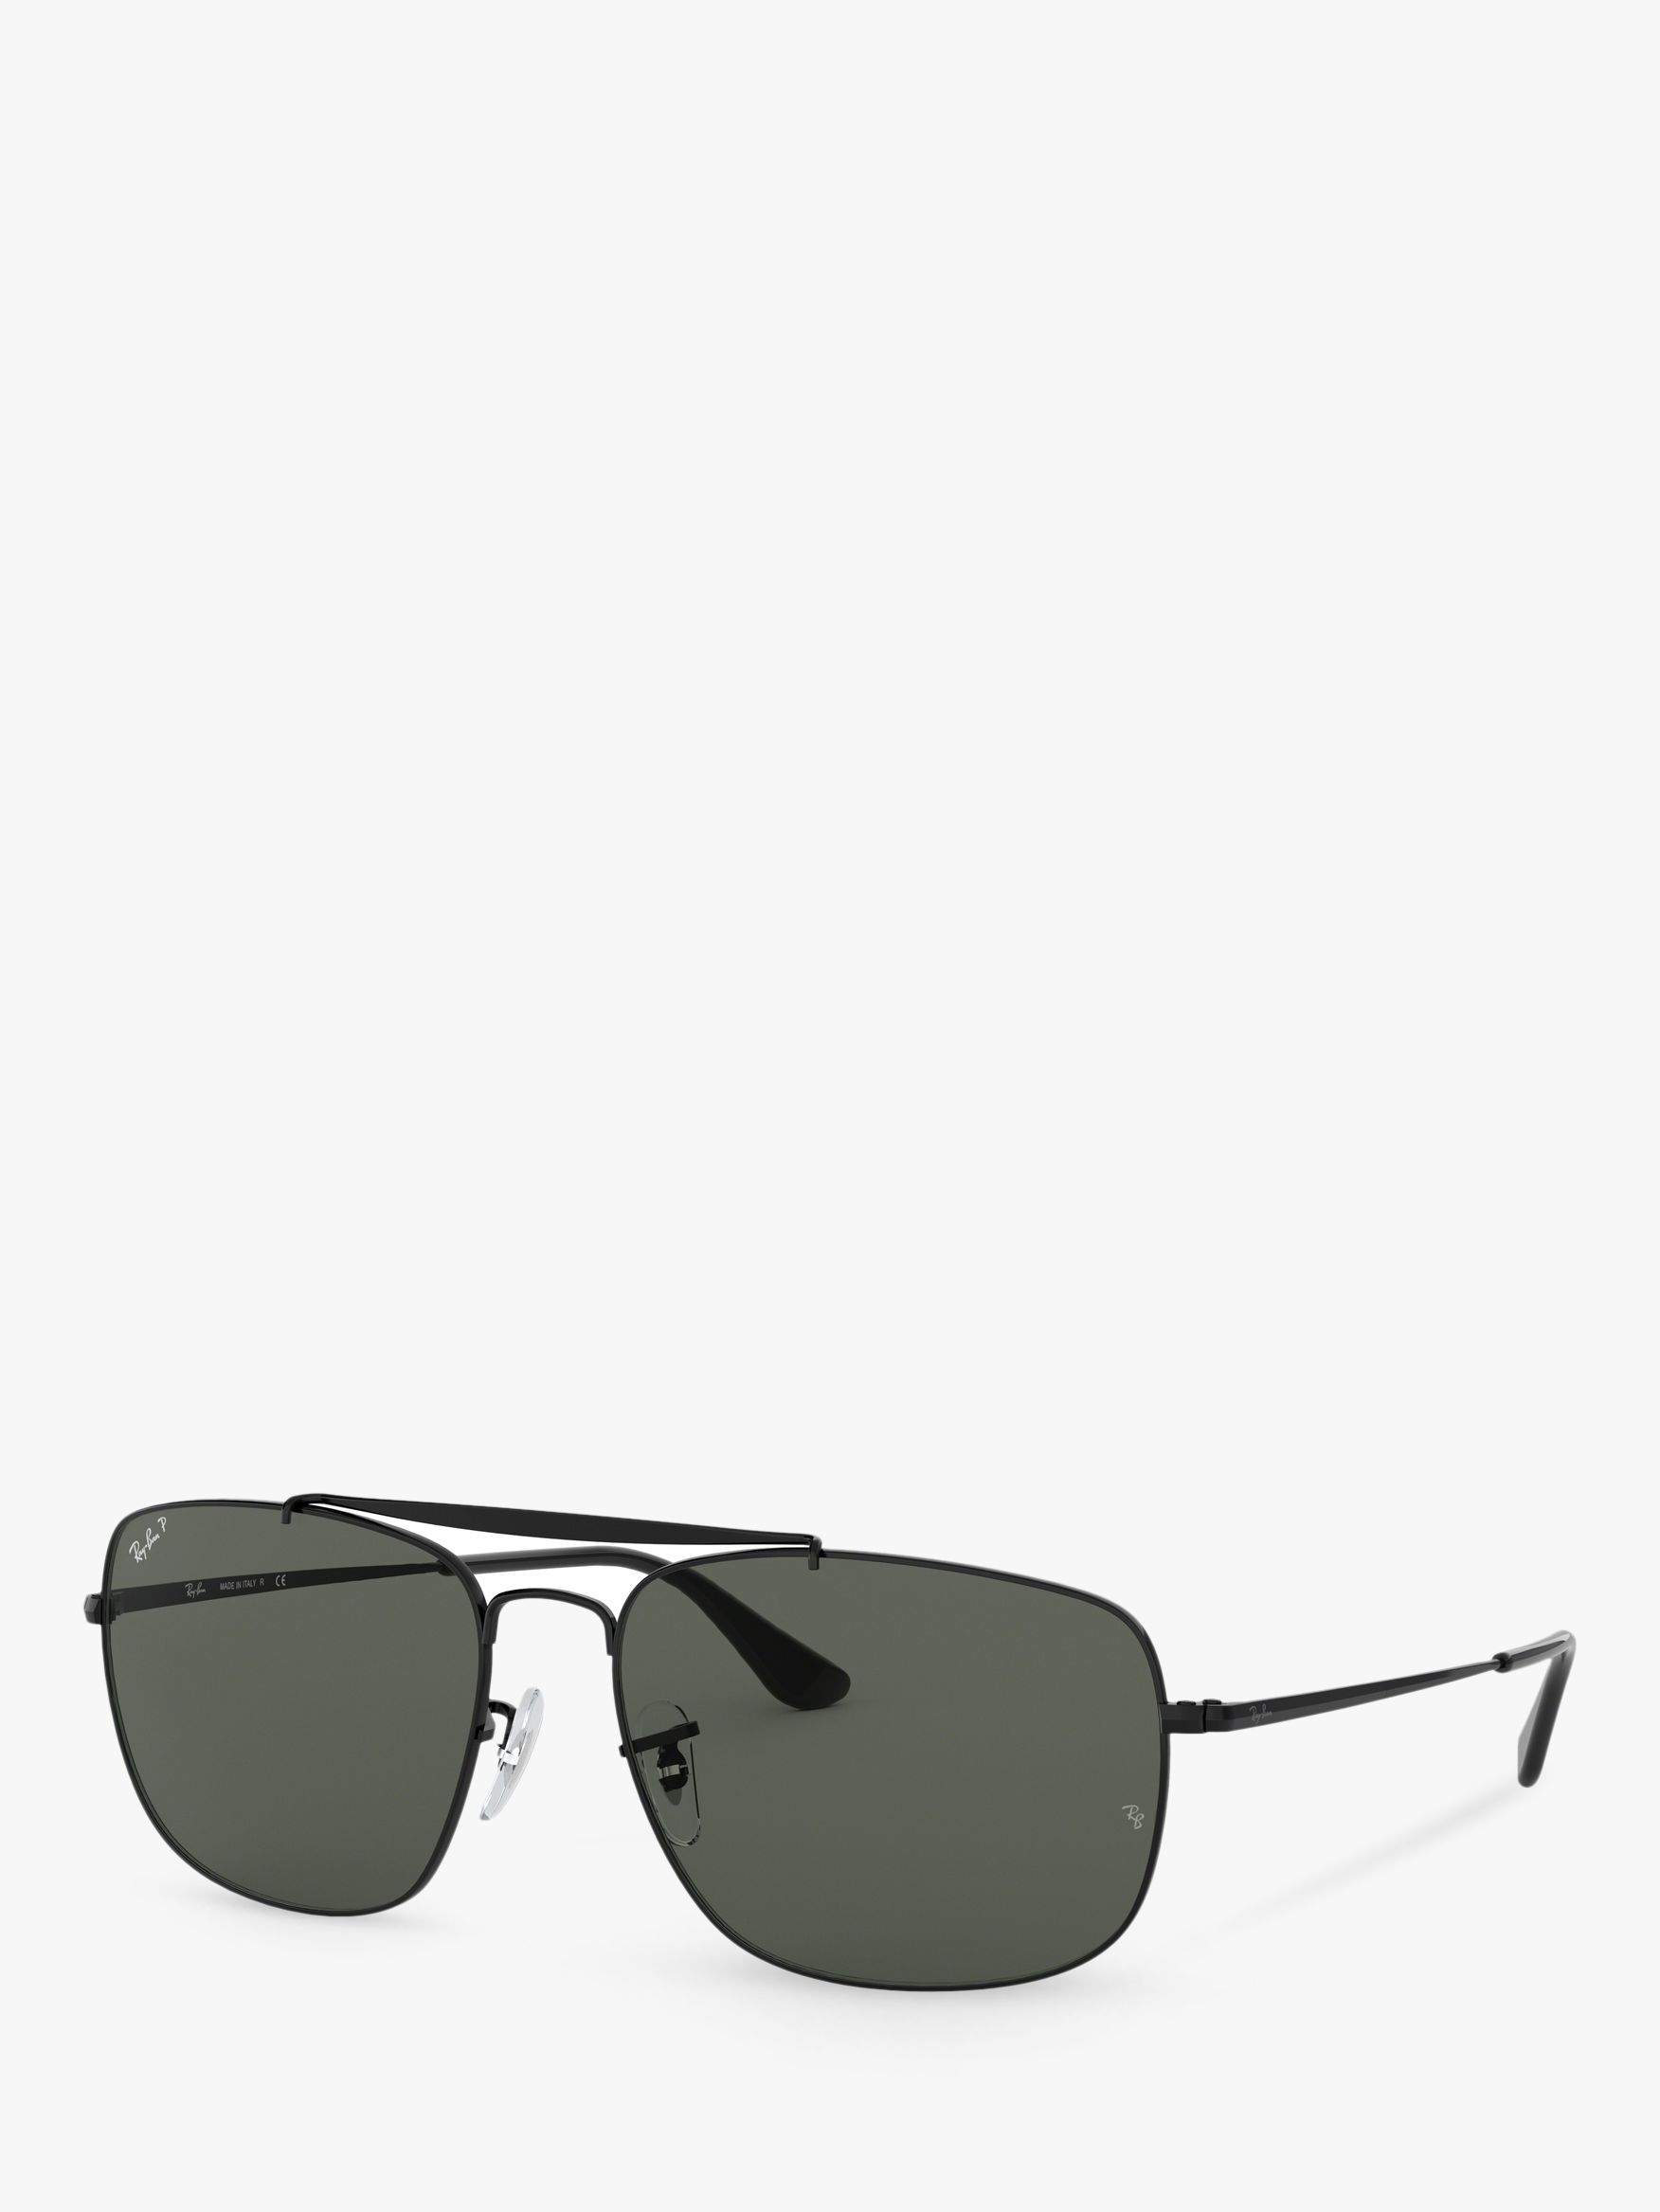 Ray-Ban RB3560 Men's The Colonel Polarised Square Sunglasses, Black/Green  at John Lewis & Partners